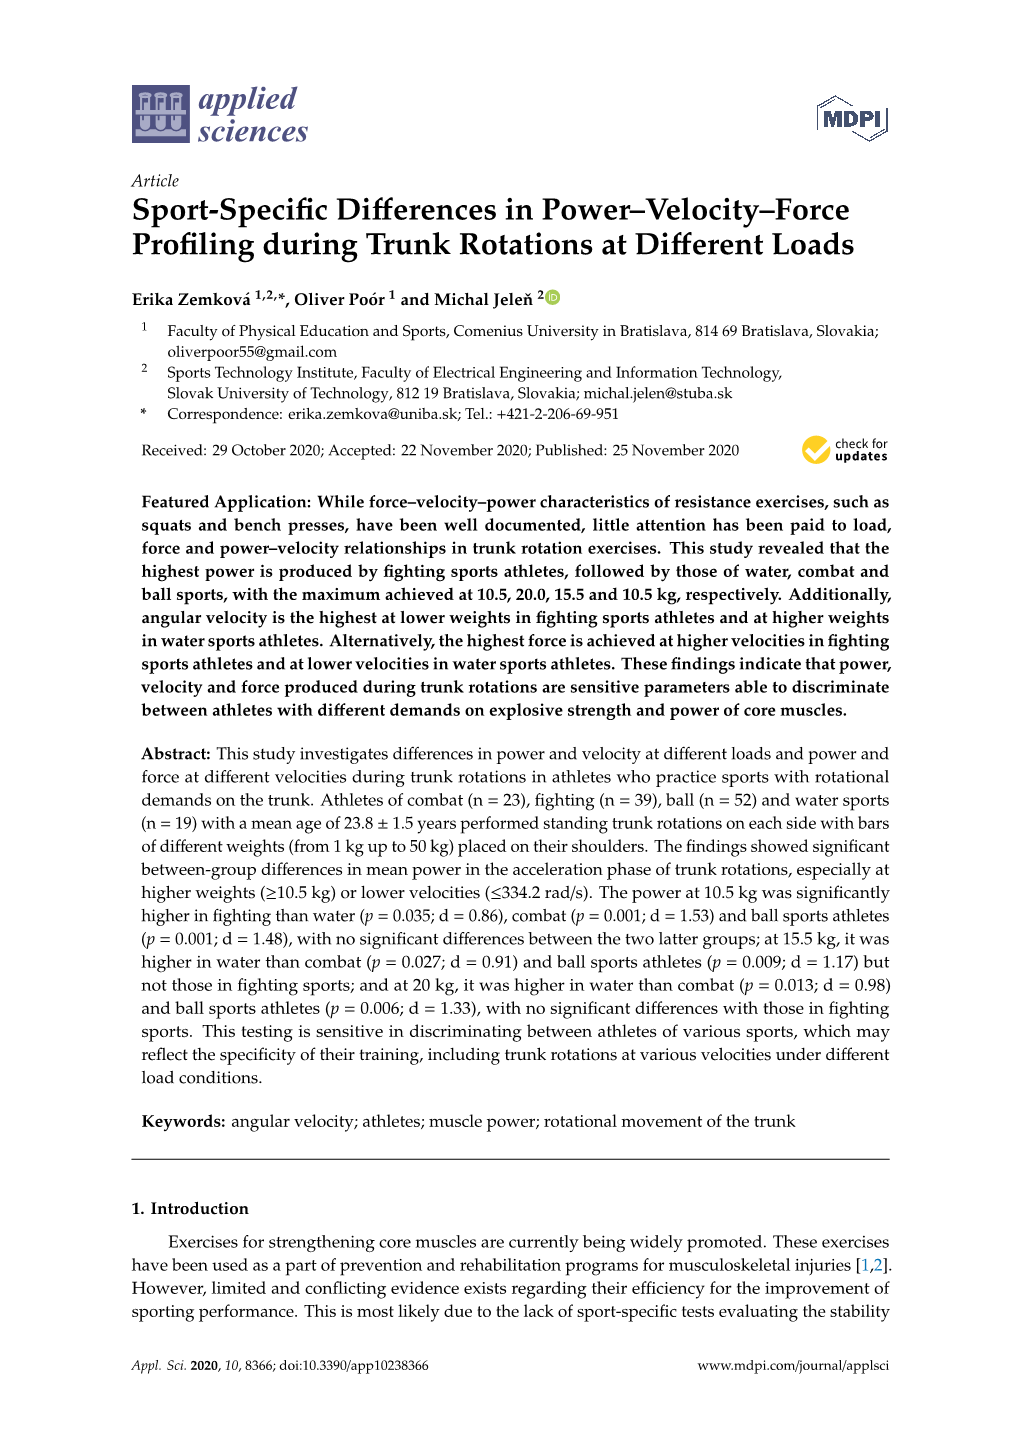 Sport-Specific Differences in Power–Velocity–Force Profiling During Trunk Rotations at Different Loads